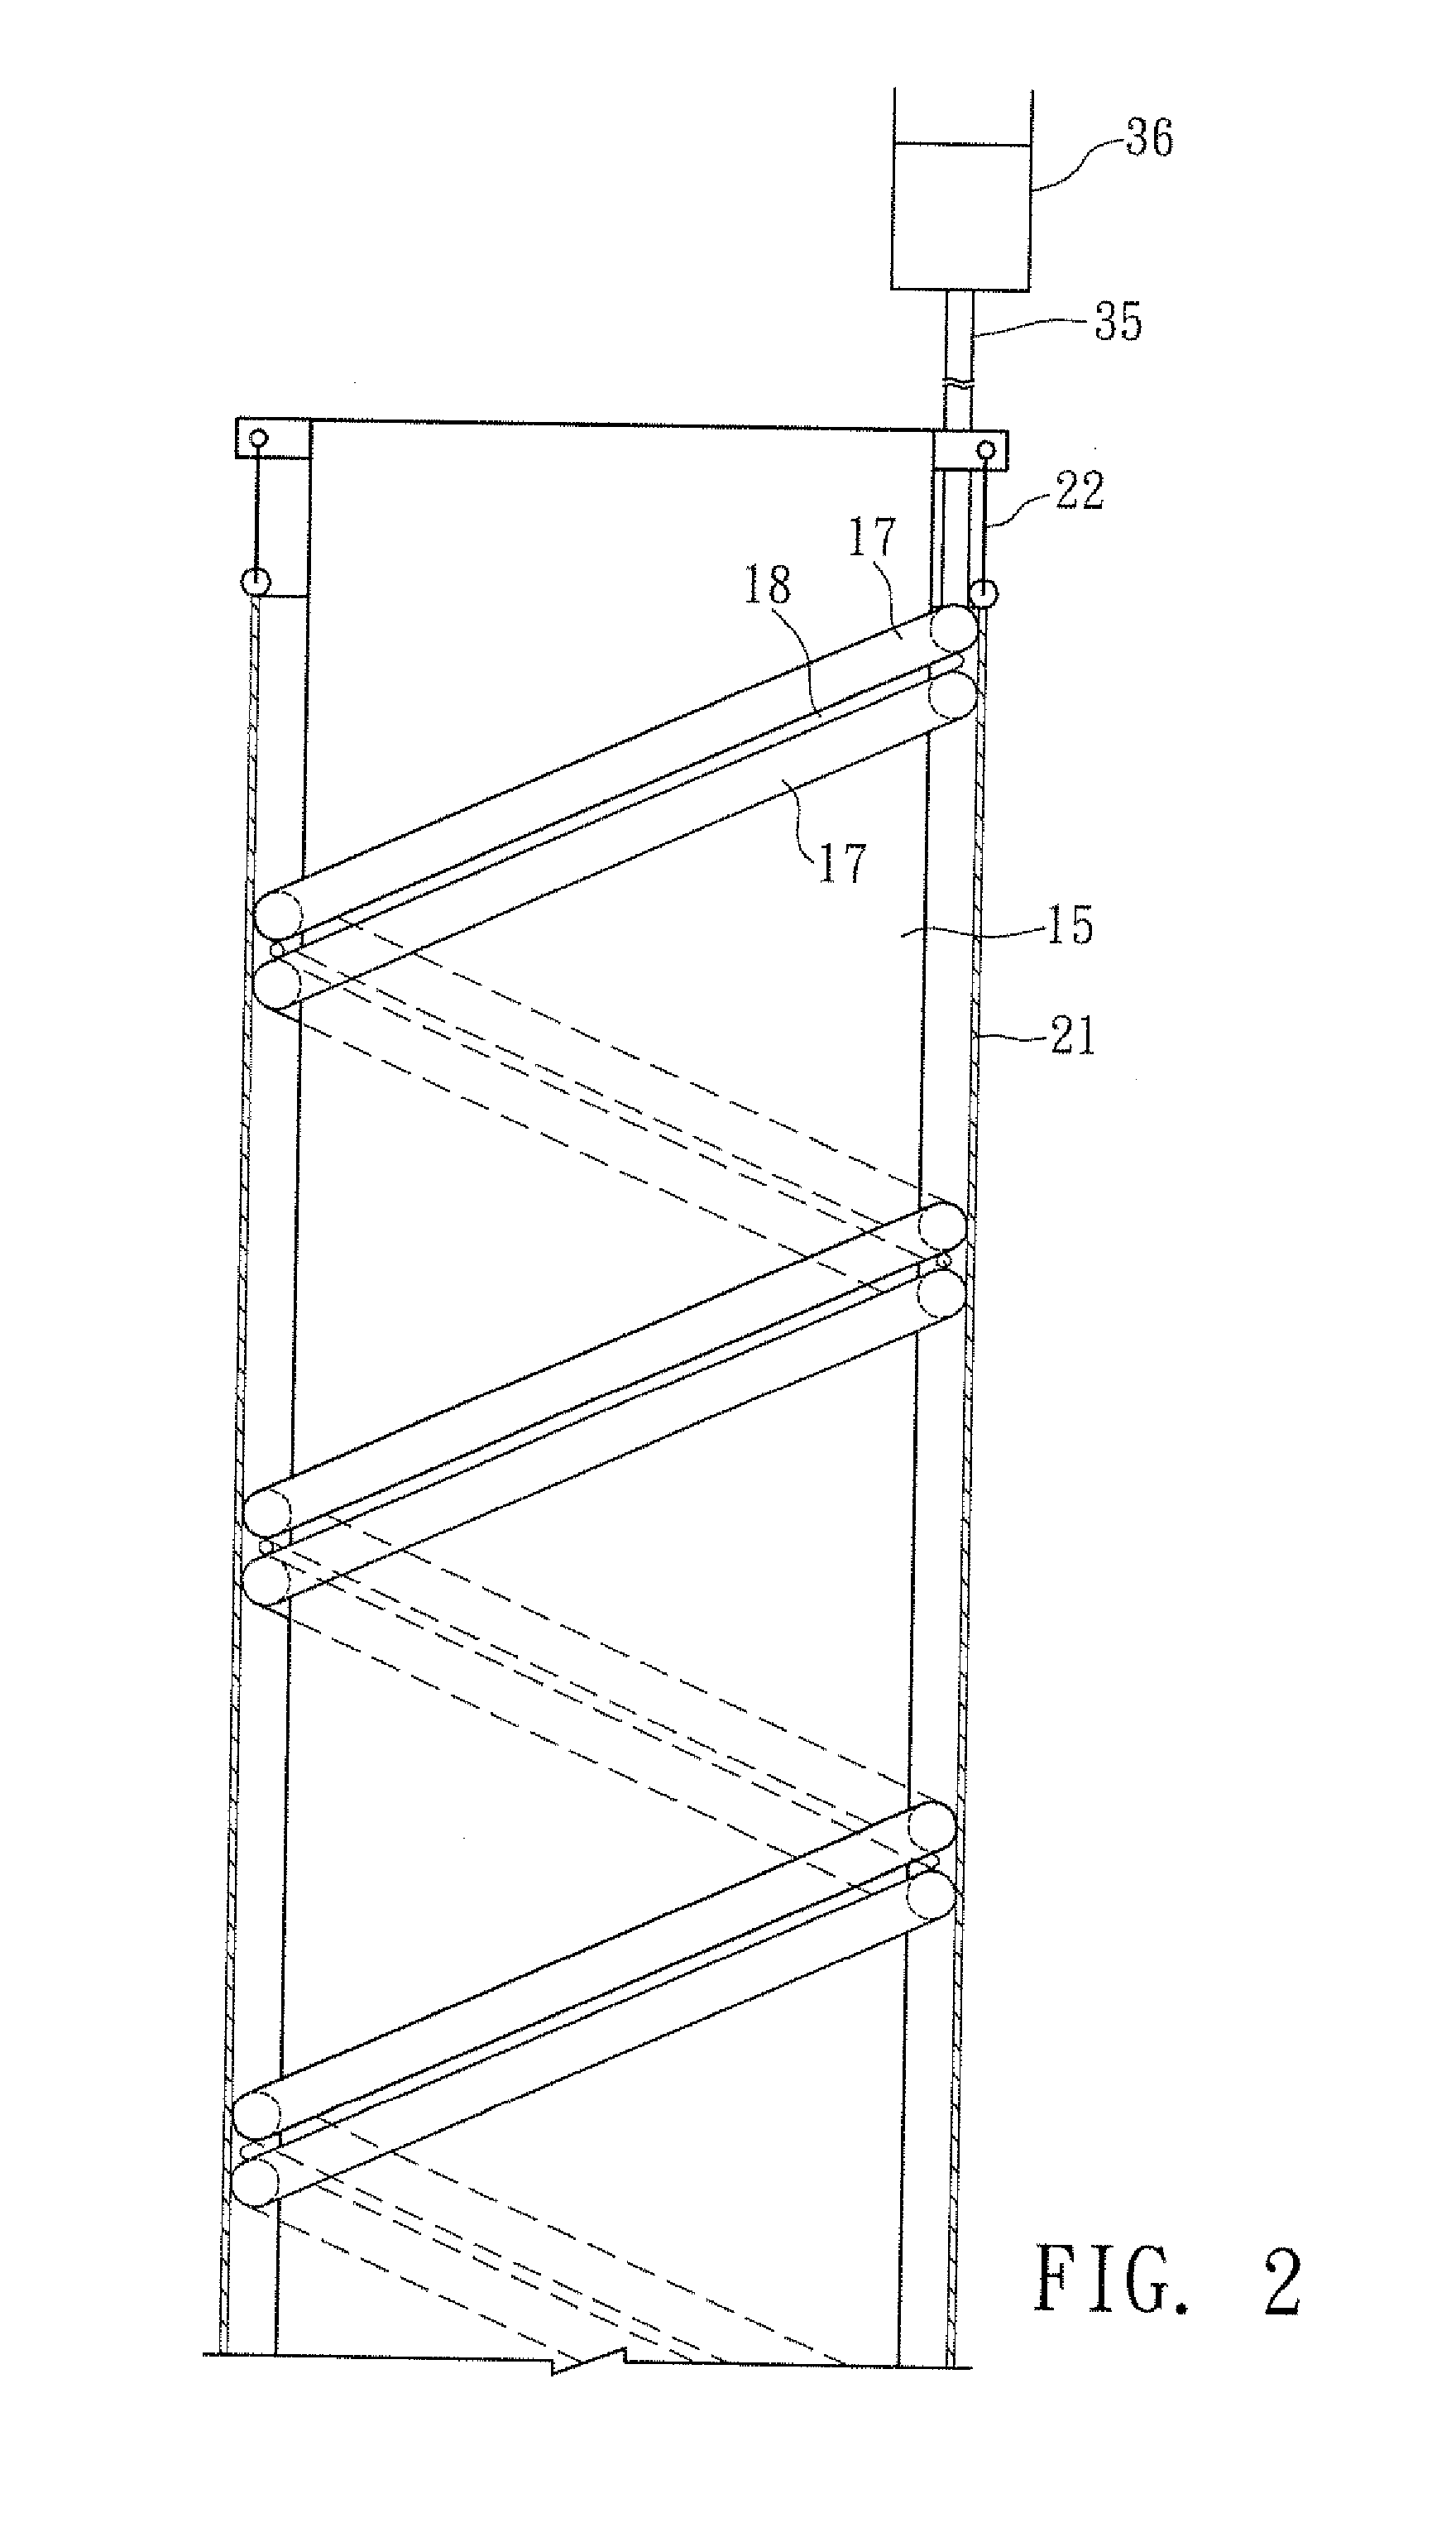 Wave Elimination System for Ocean Thermal Energy Conversion Assembly